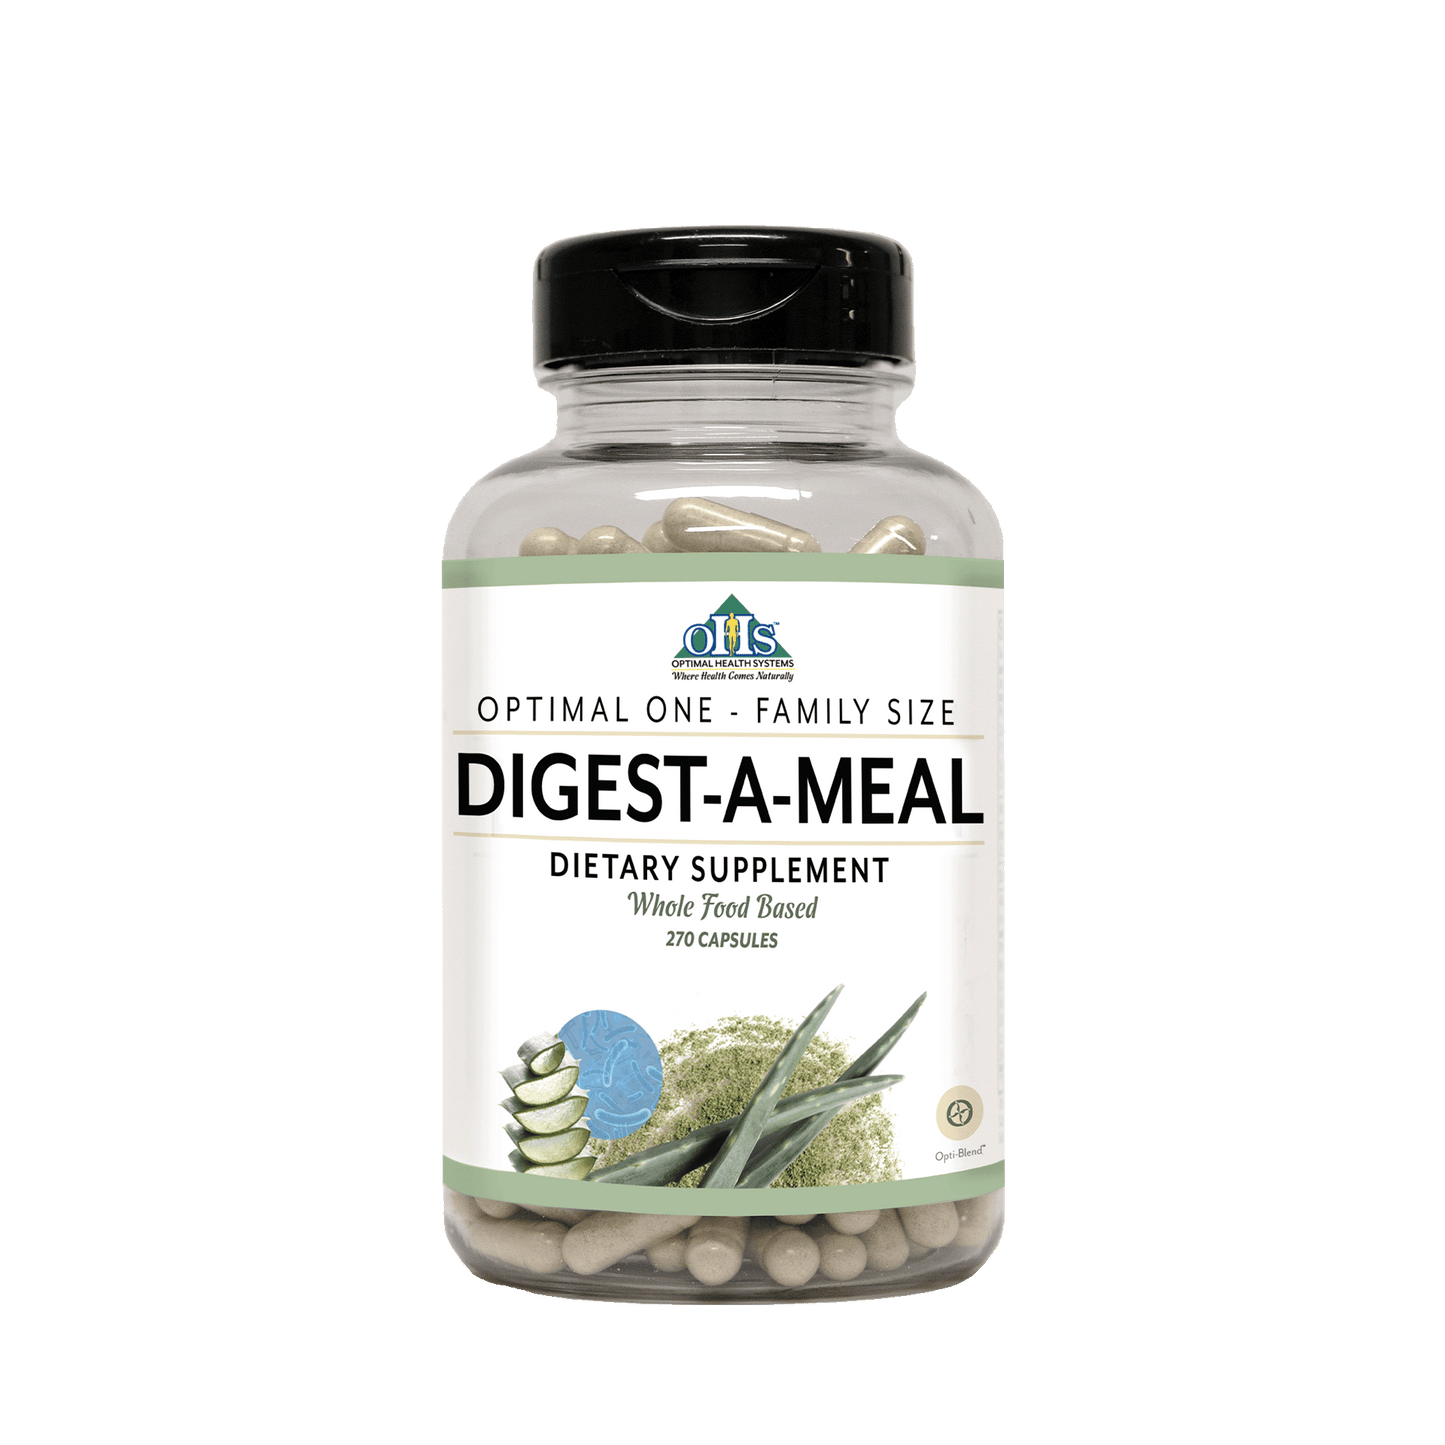 Optimal 1 Digest-A-Meal - Family Size